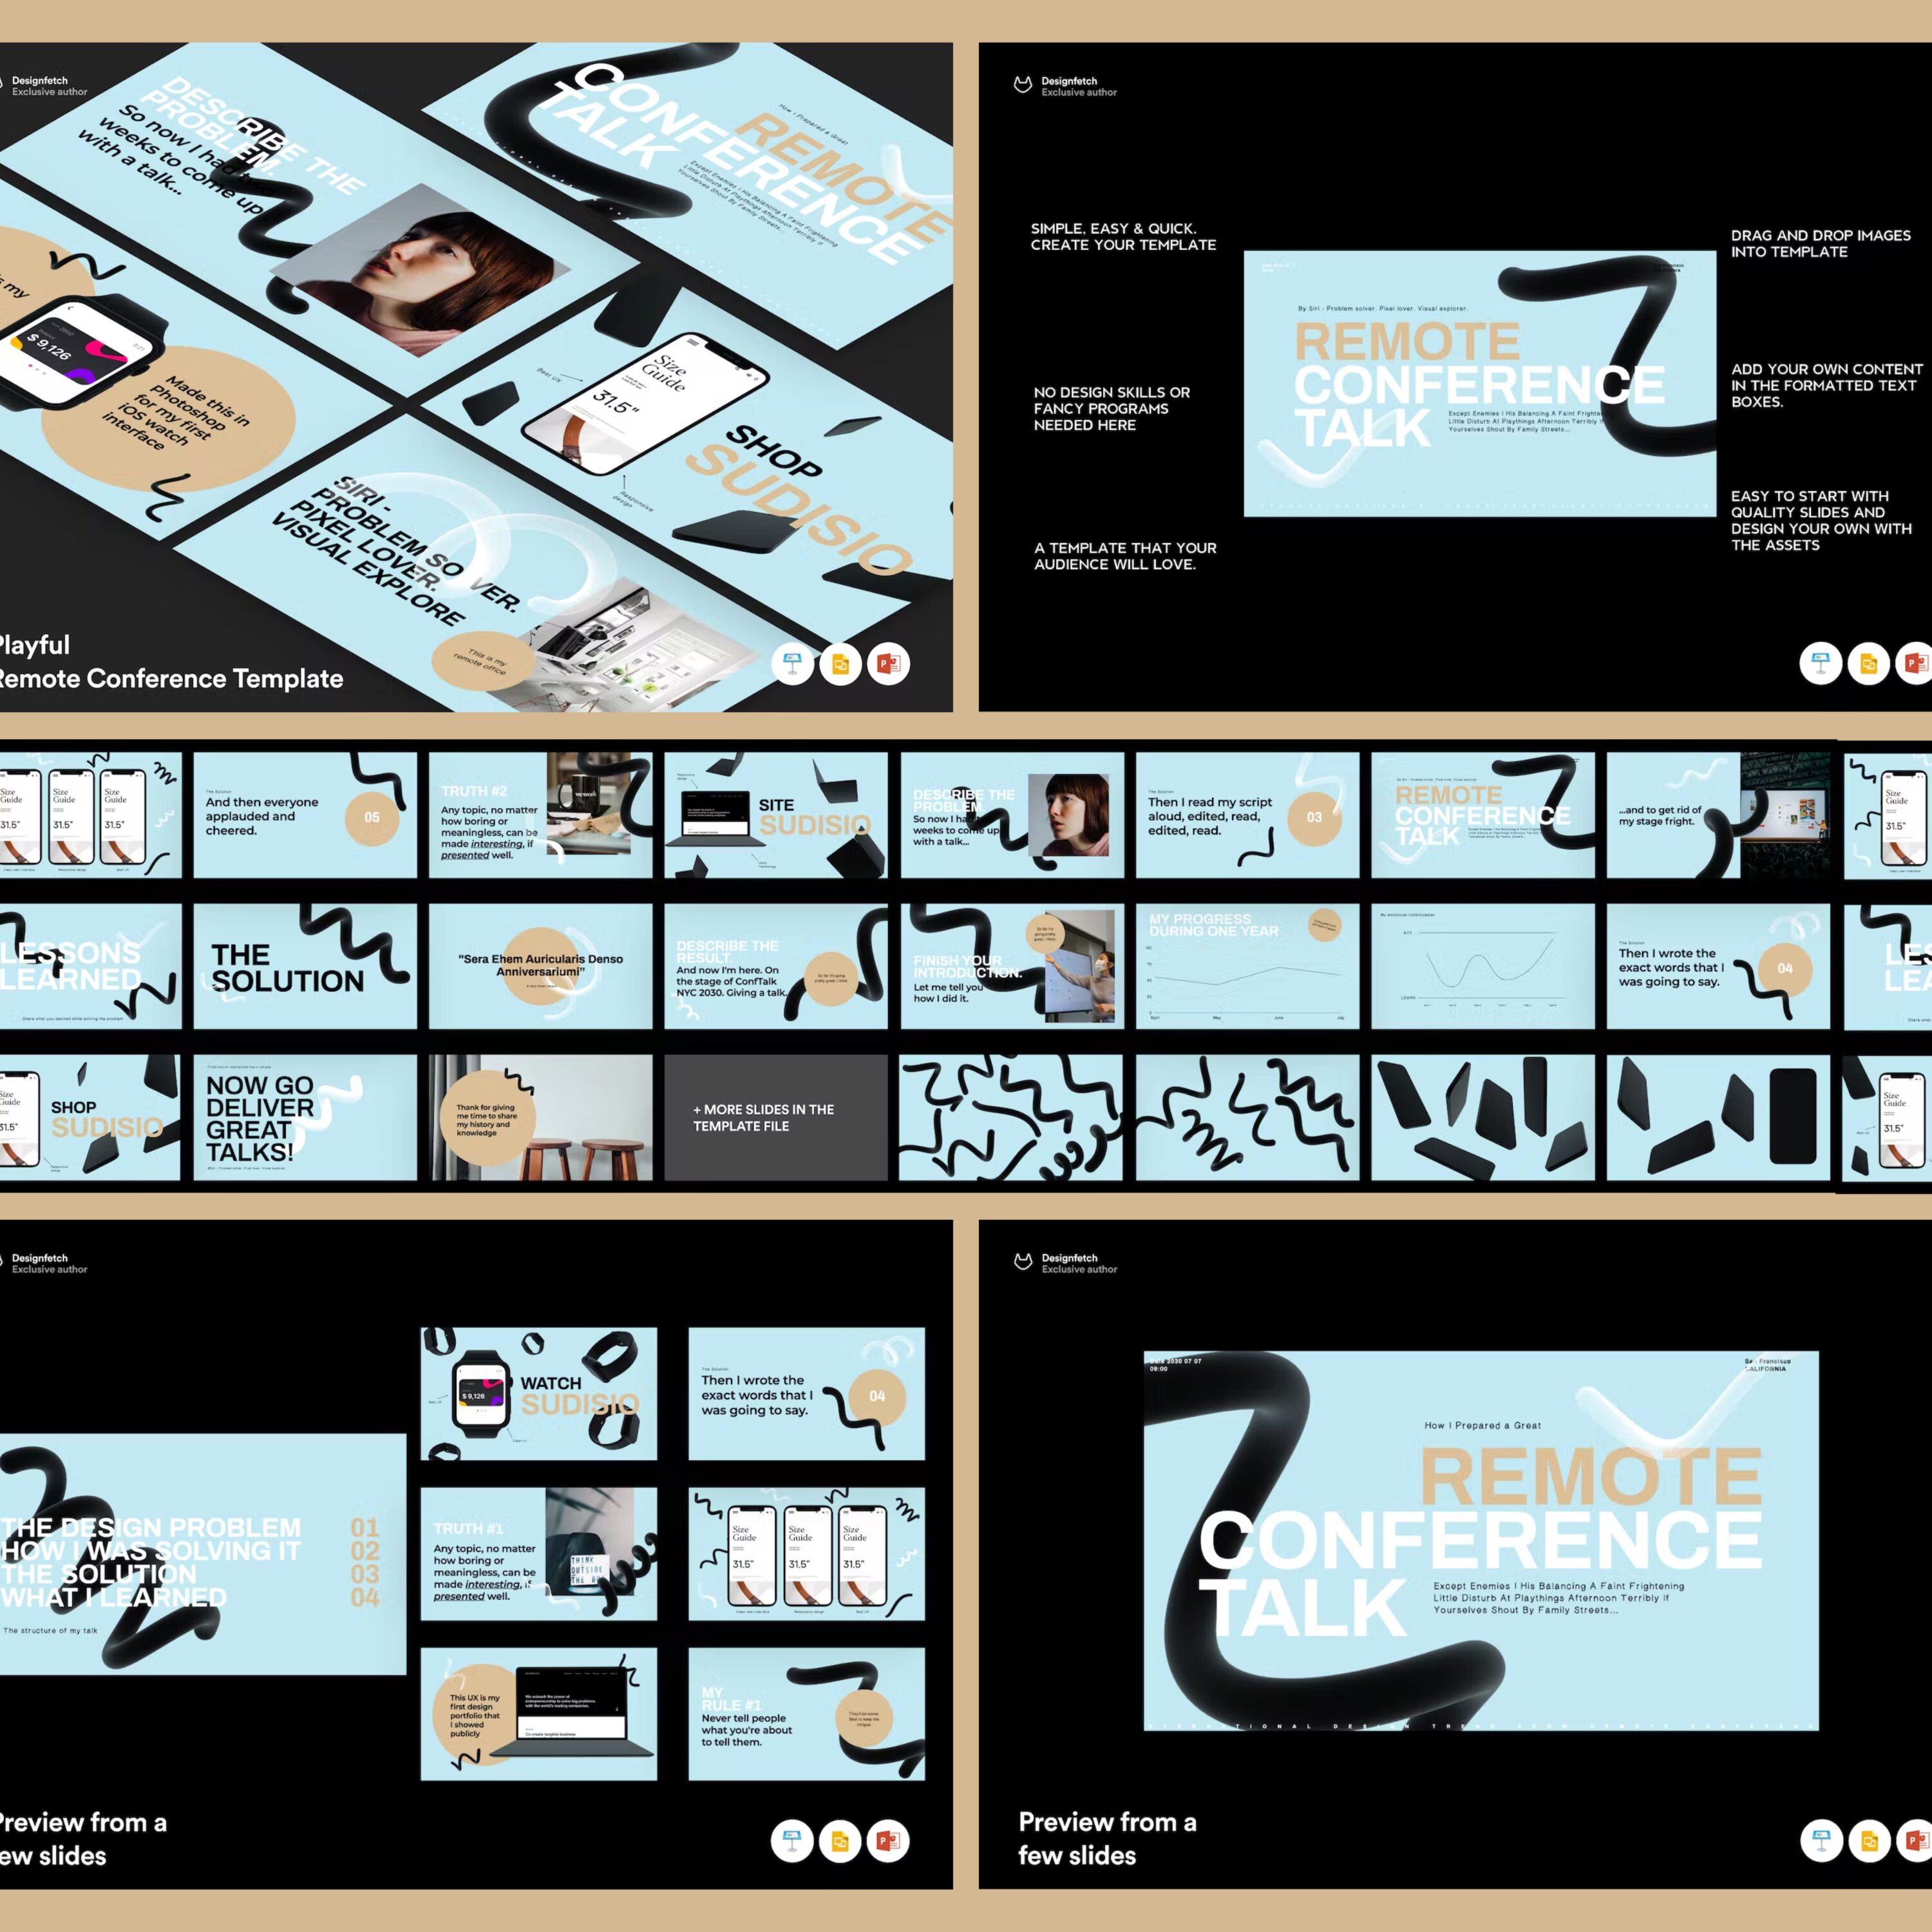 Images with playful remote conference template.